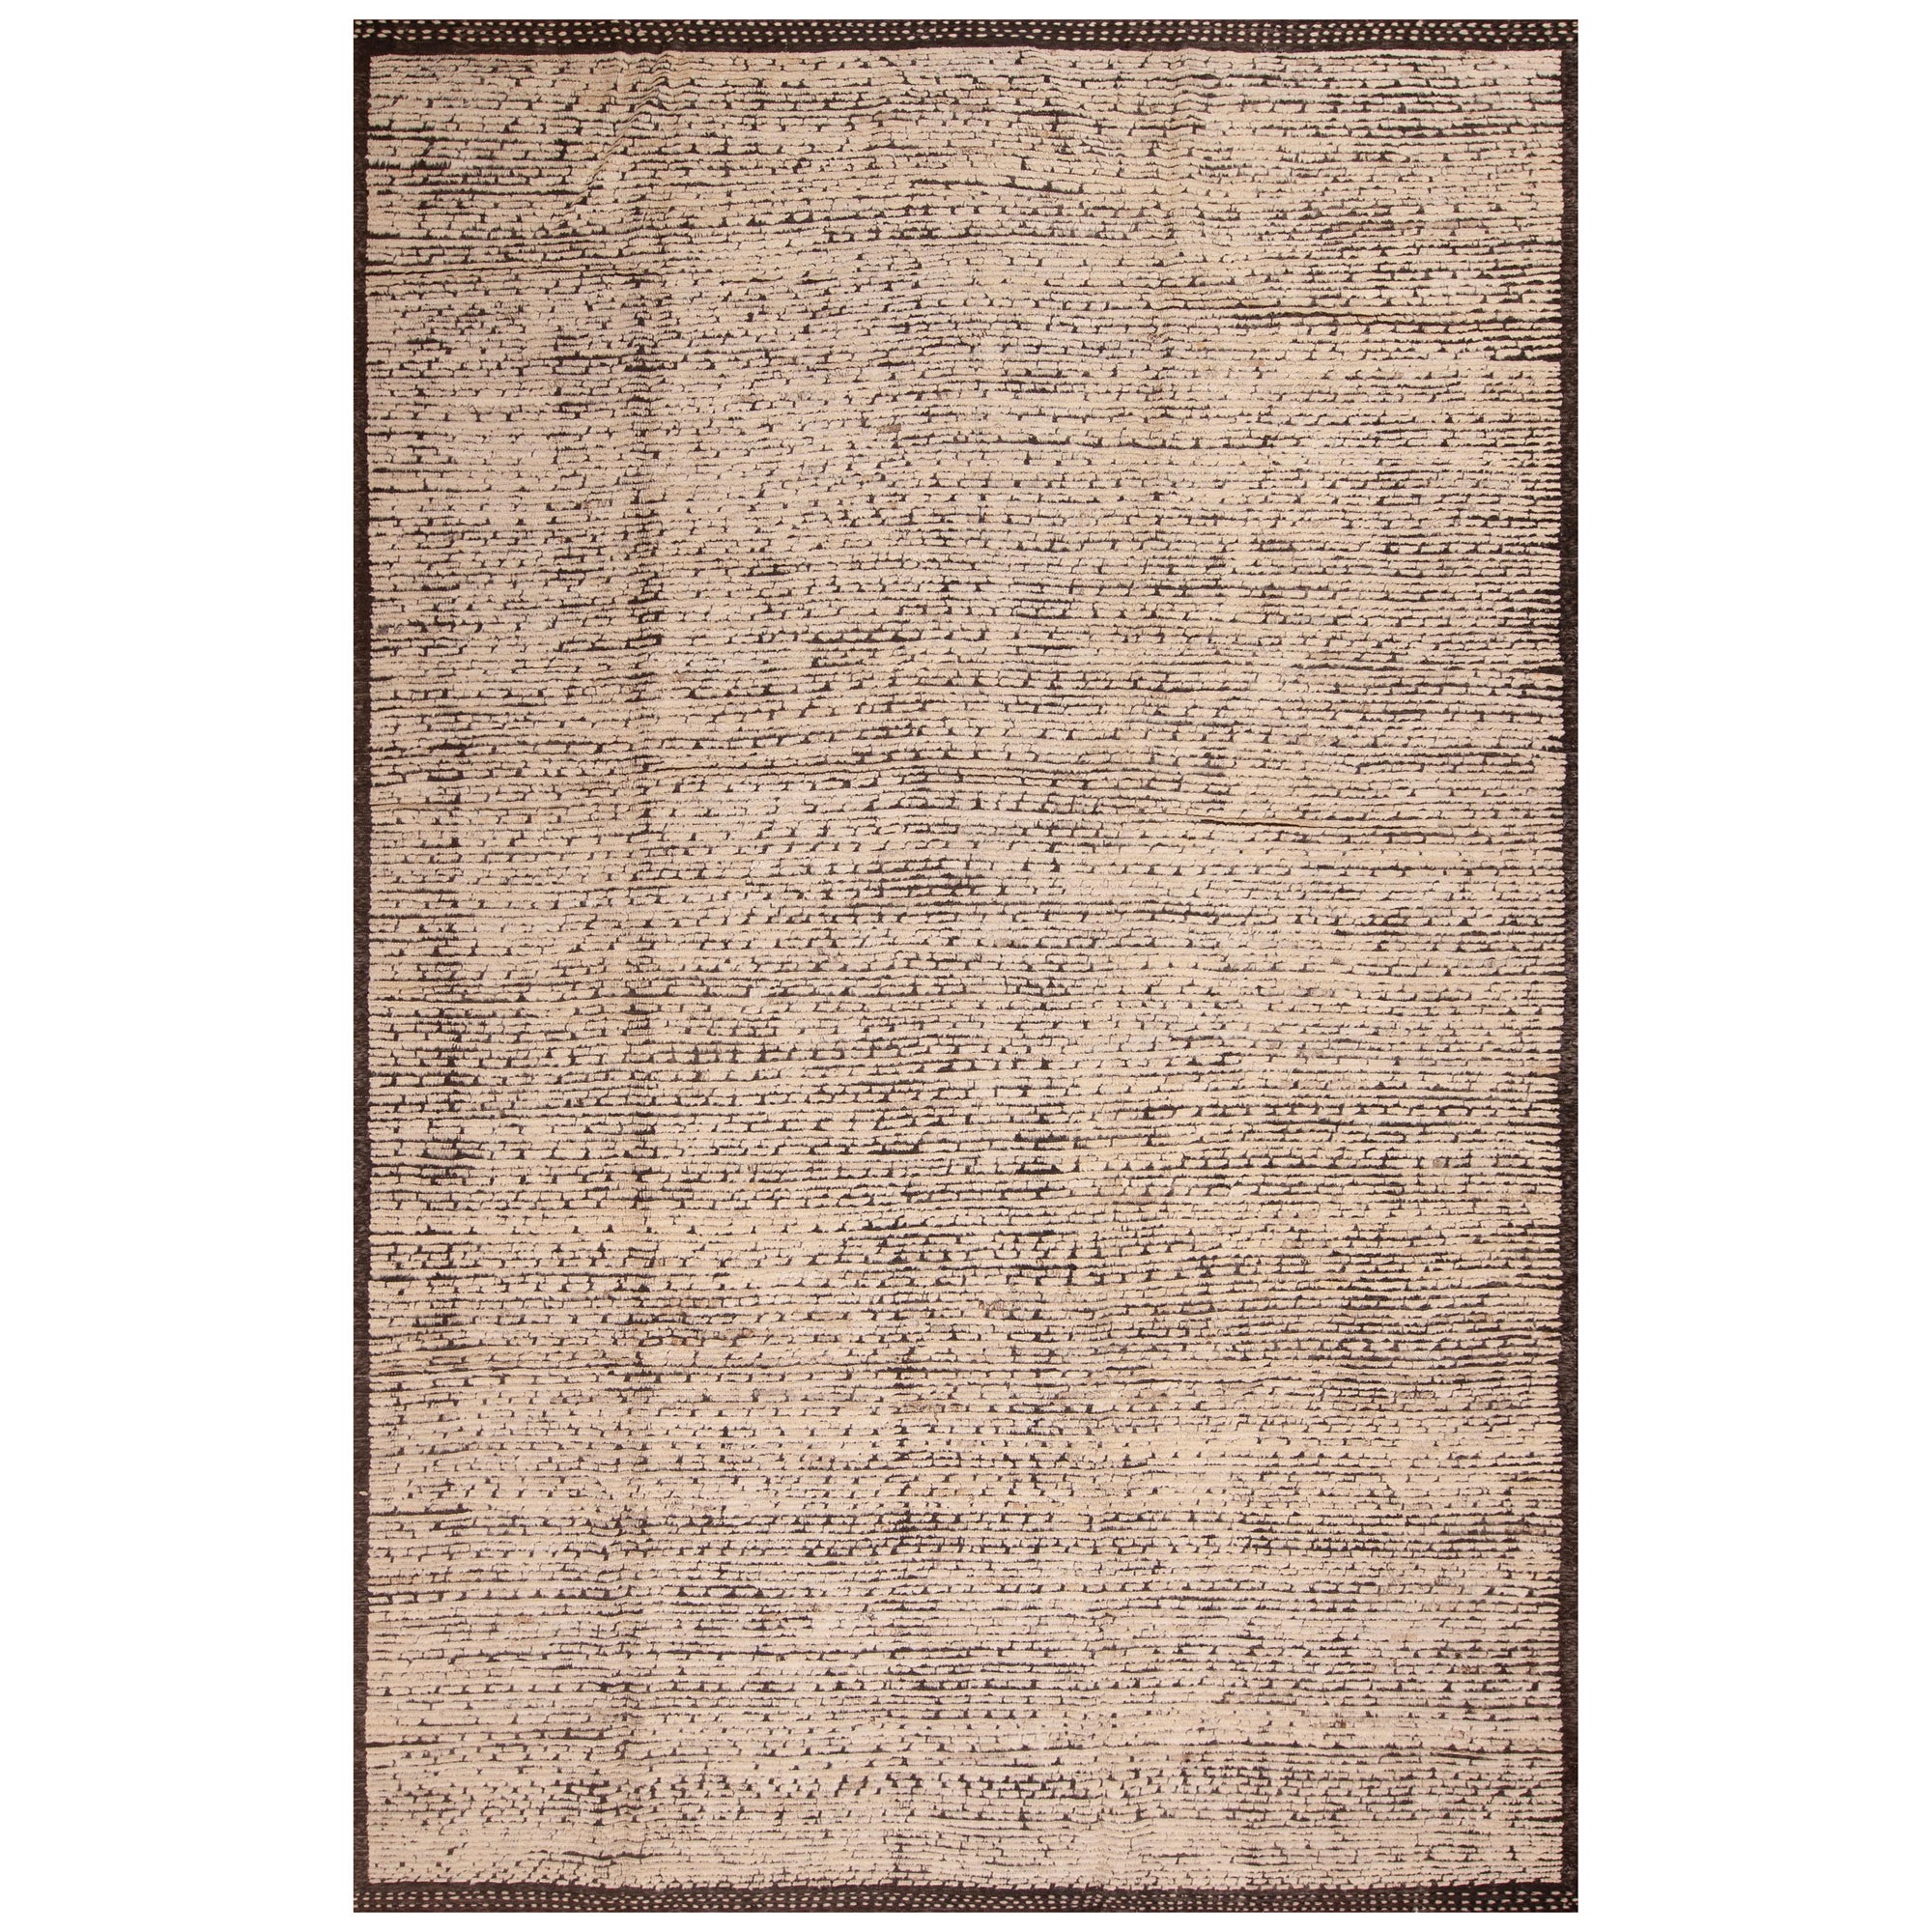 Nazmiyal Collection Artistic Speckled Pattern Modern Room Size Rug 8'6" x 13'2" For Sale